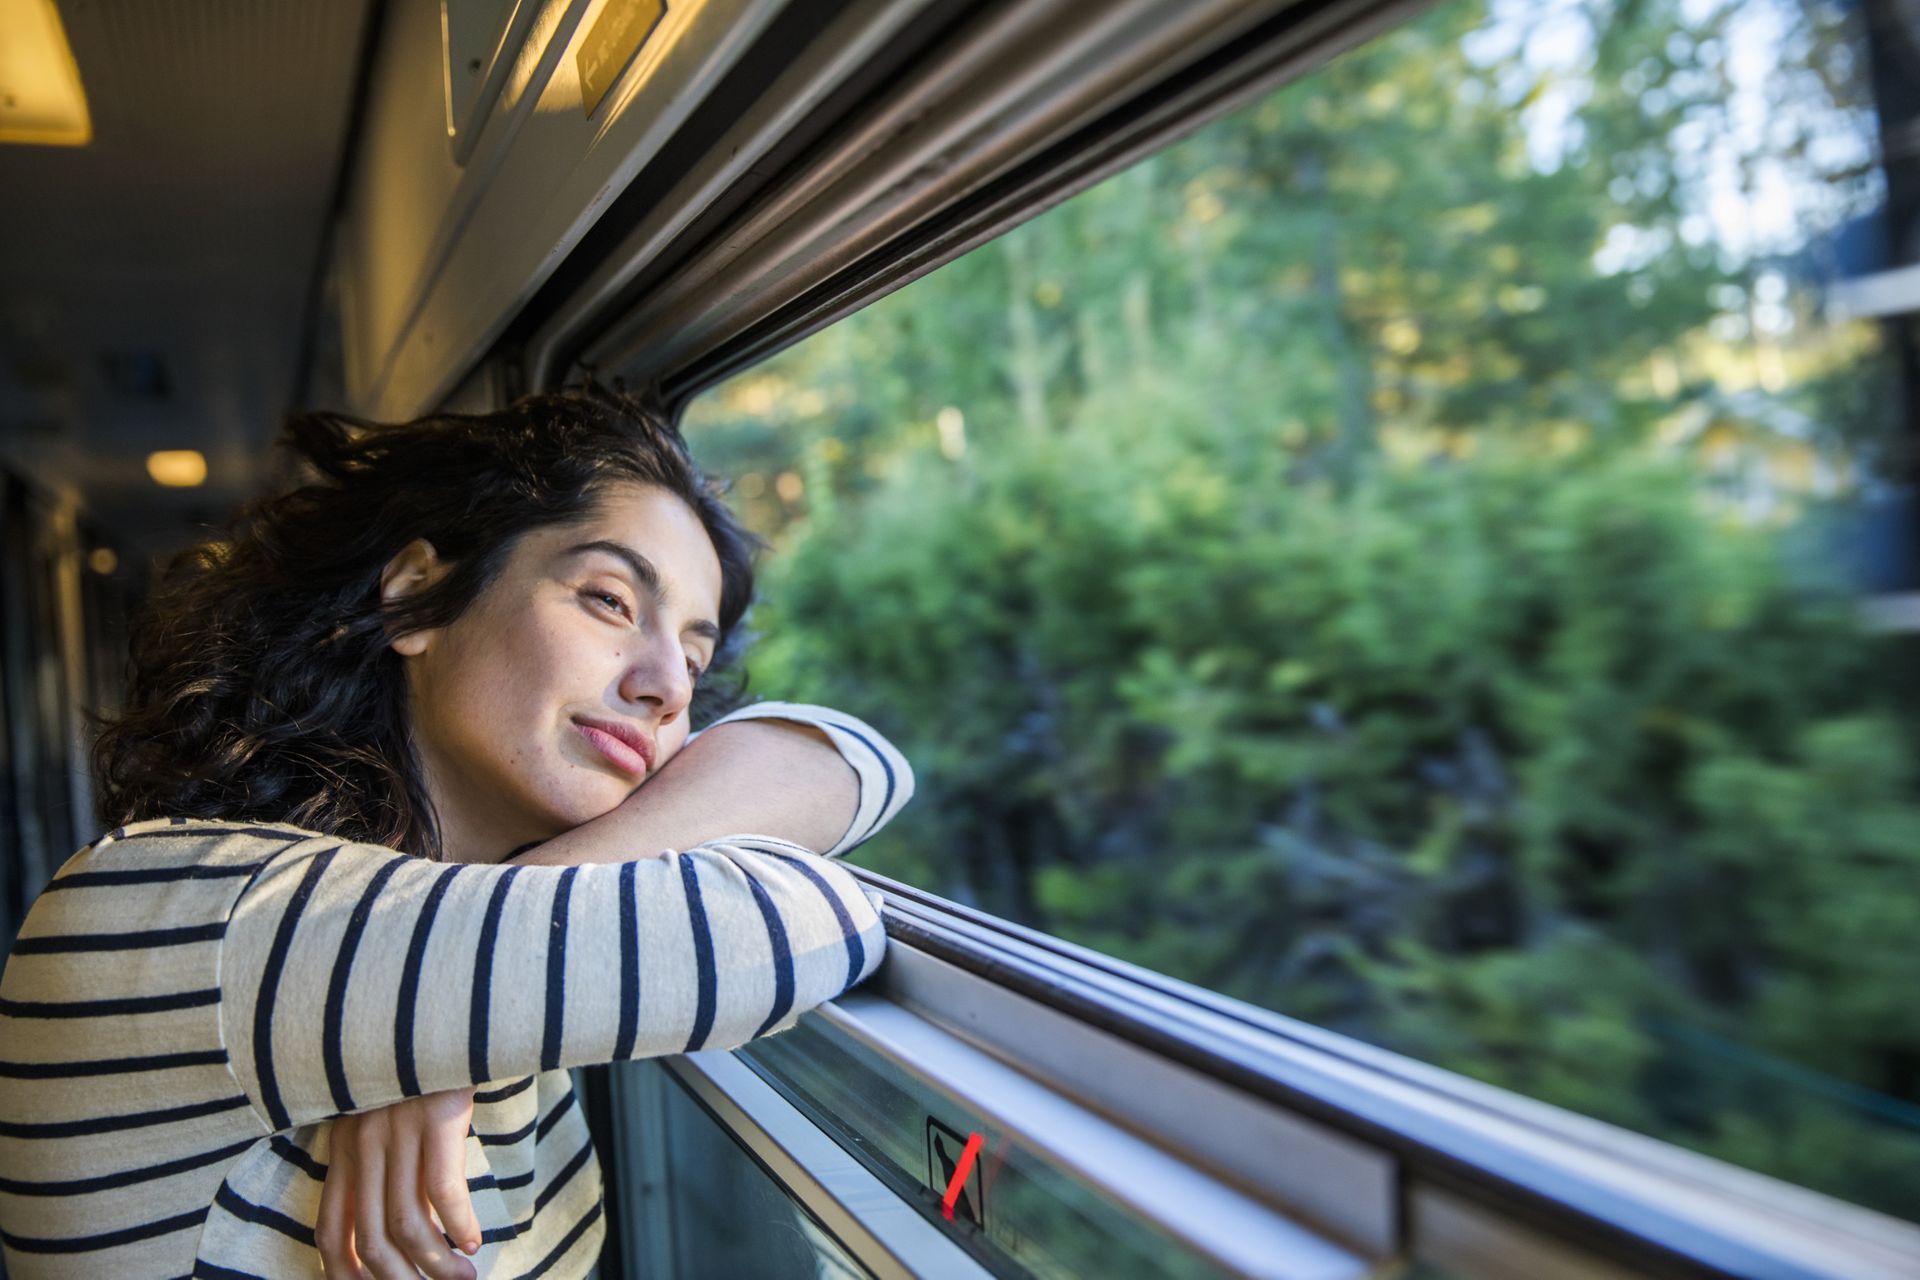 A woman is looking out of the window on a train while passing forest and greenery.